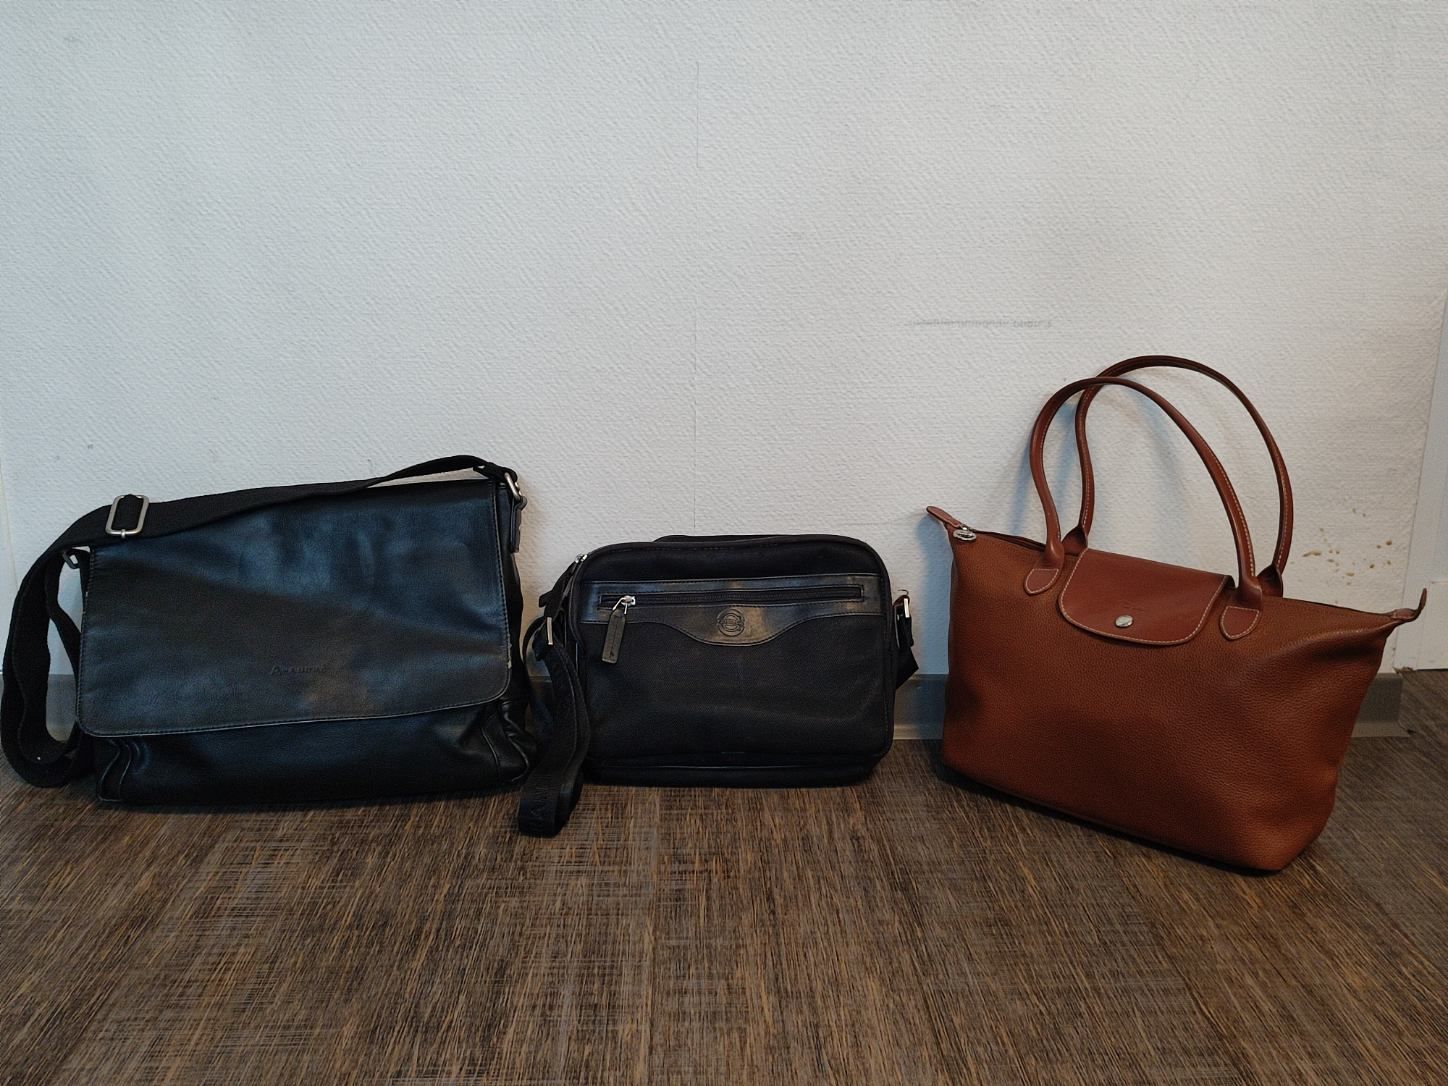 Null Set in used condition including:
- LONGCHAMP. Brown grained leather handbag&hellip;